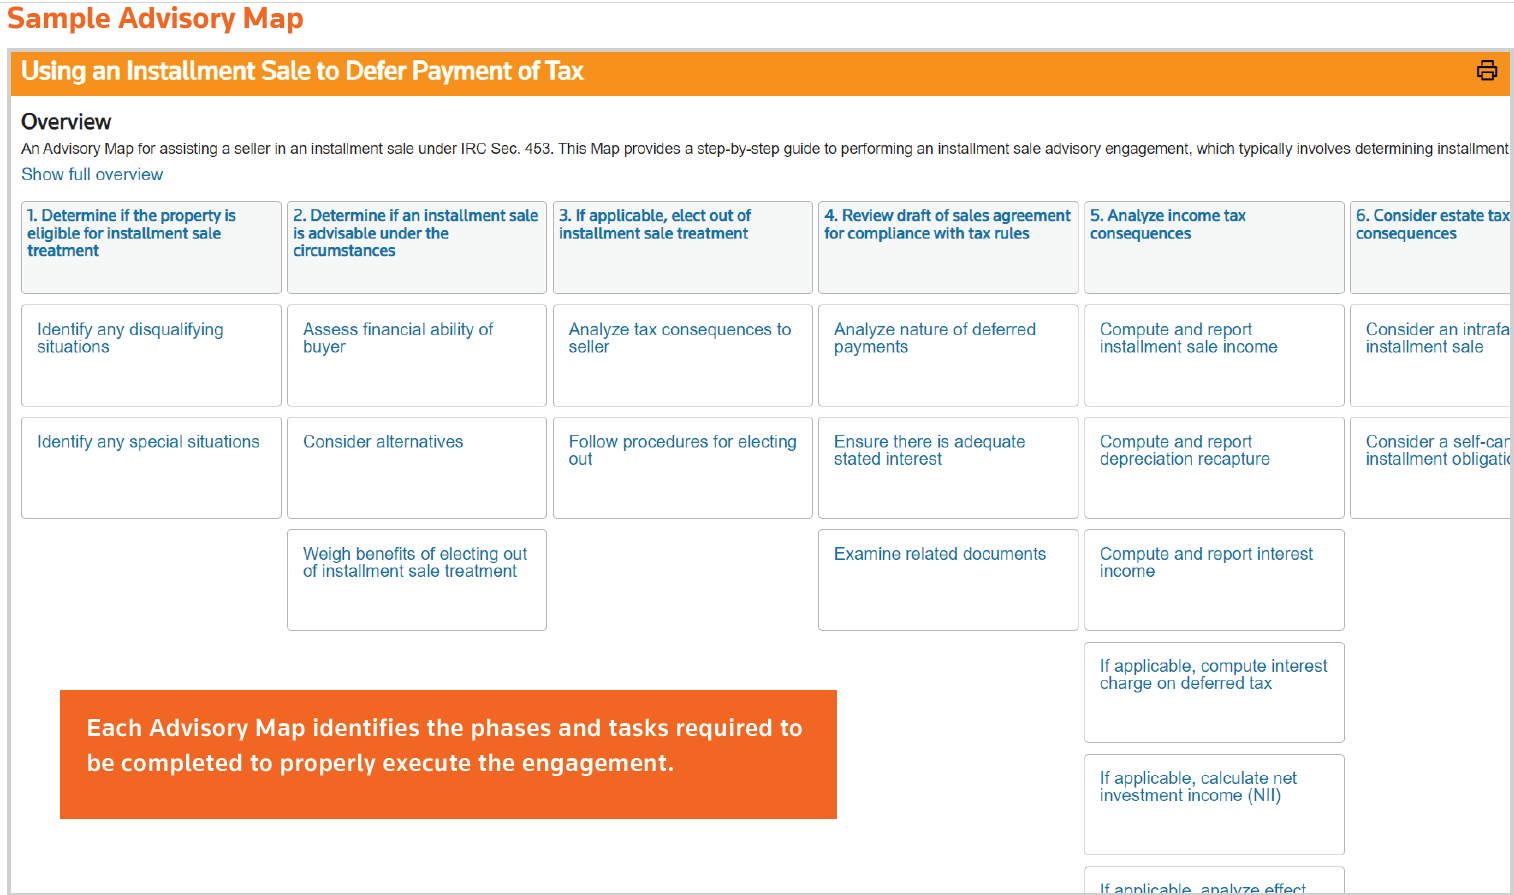  A sample Advisory Map on Checkpoint showing the overview for using an installment sale to defer payment of tax.